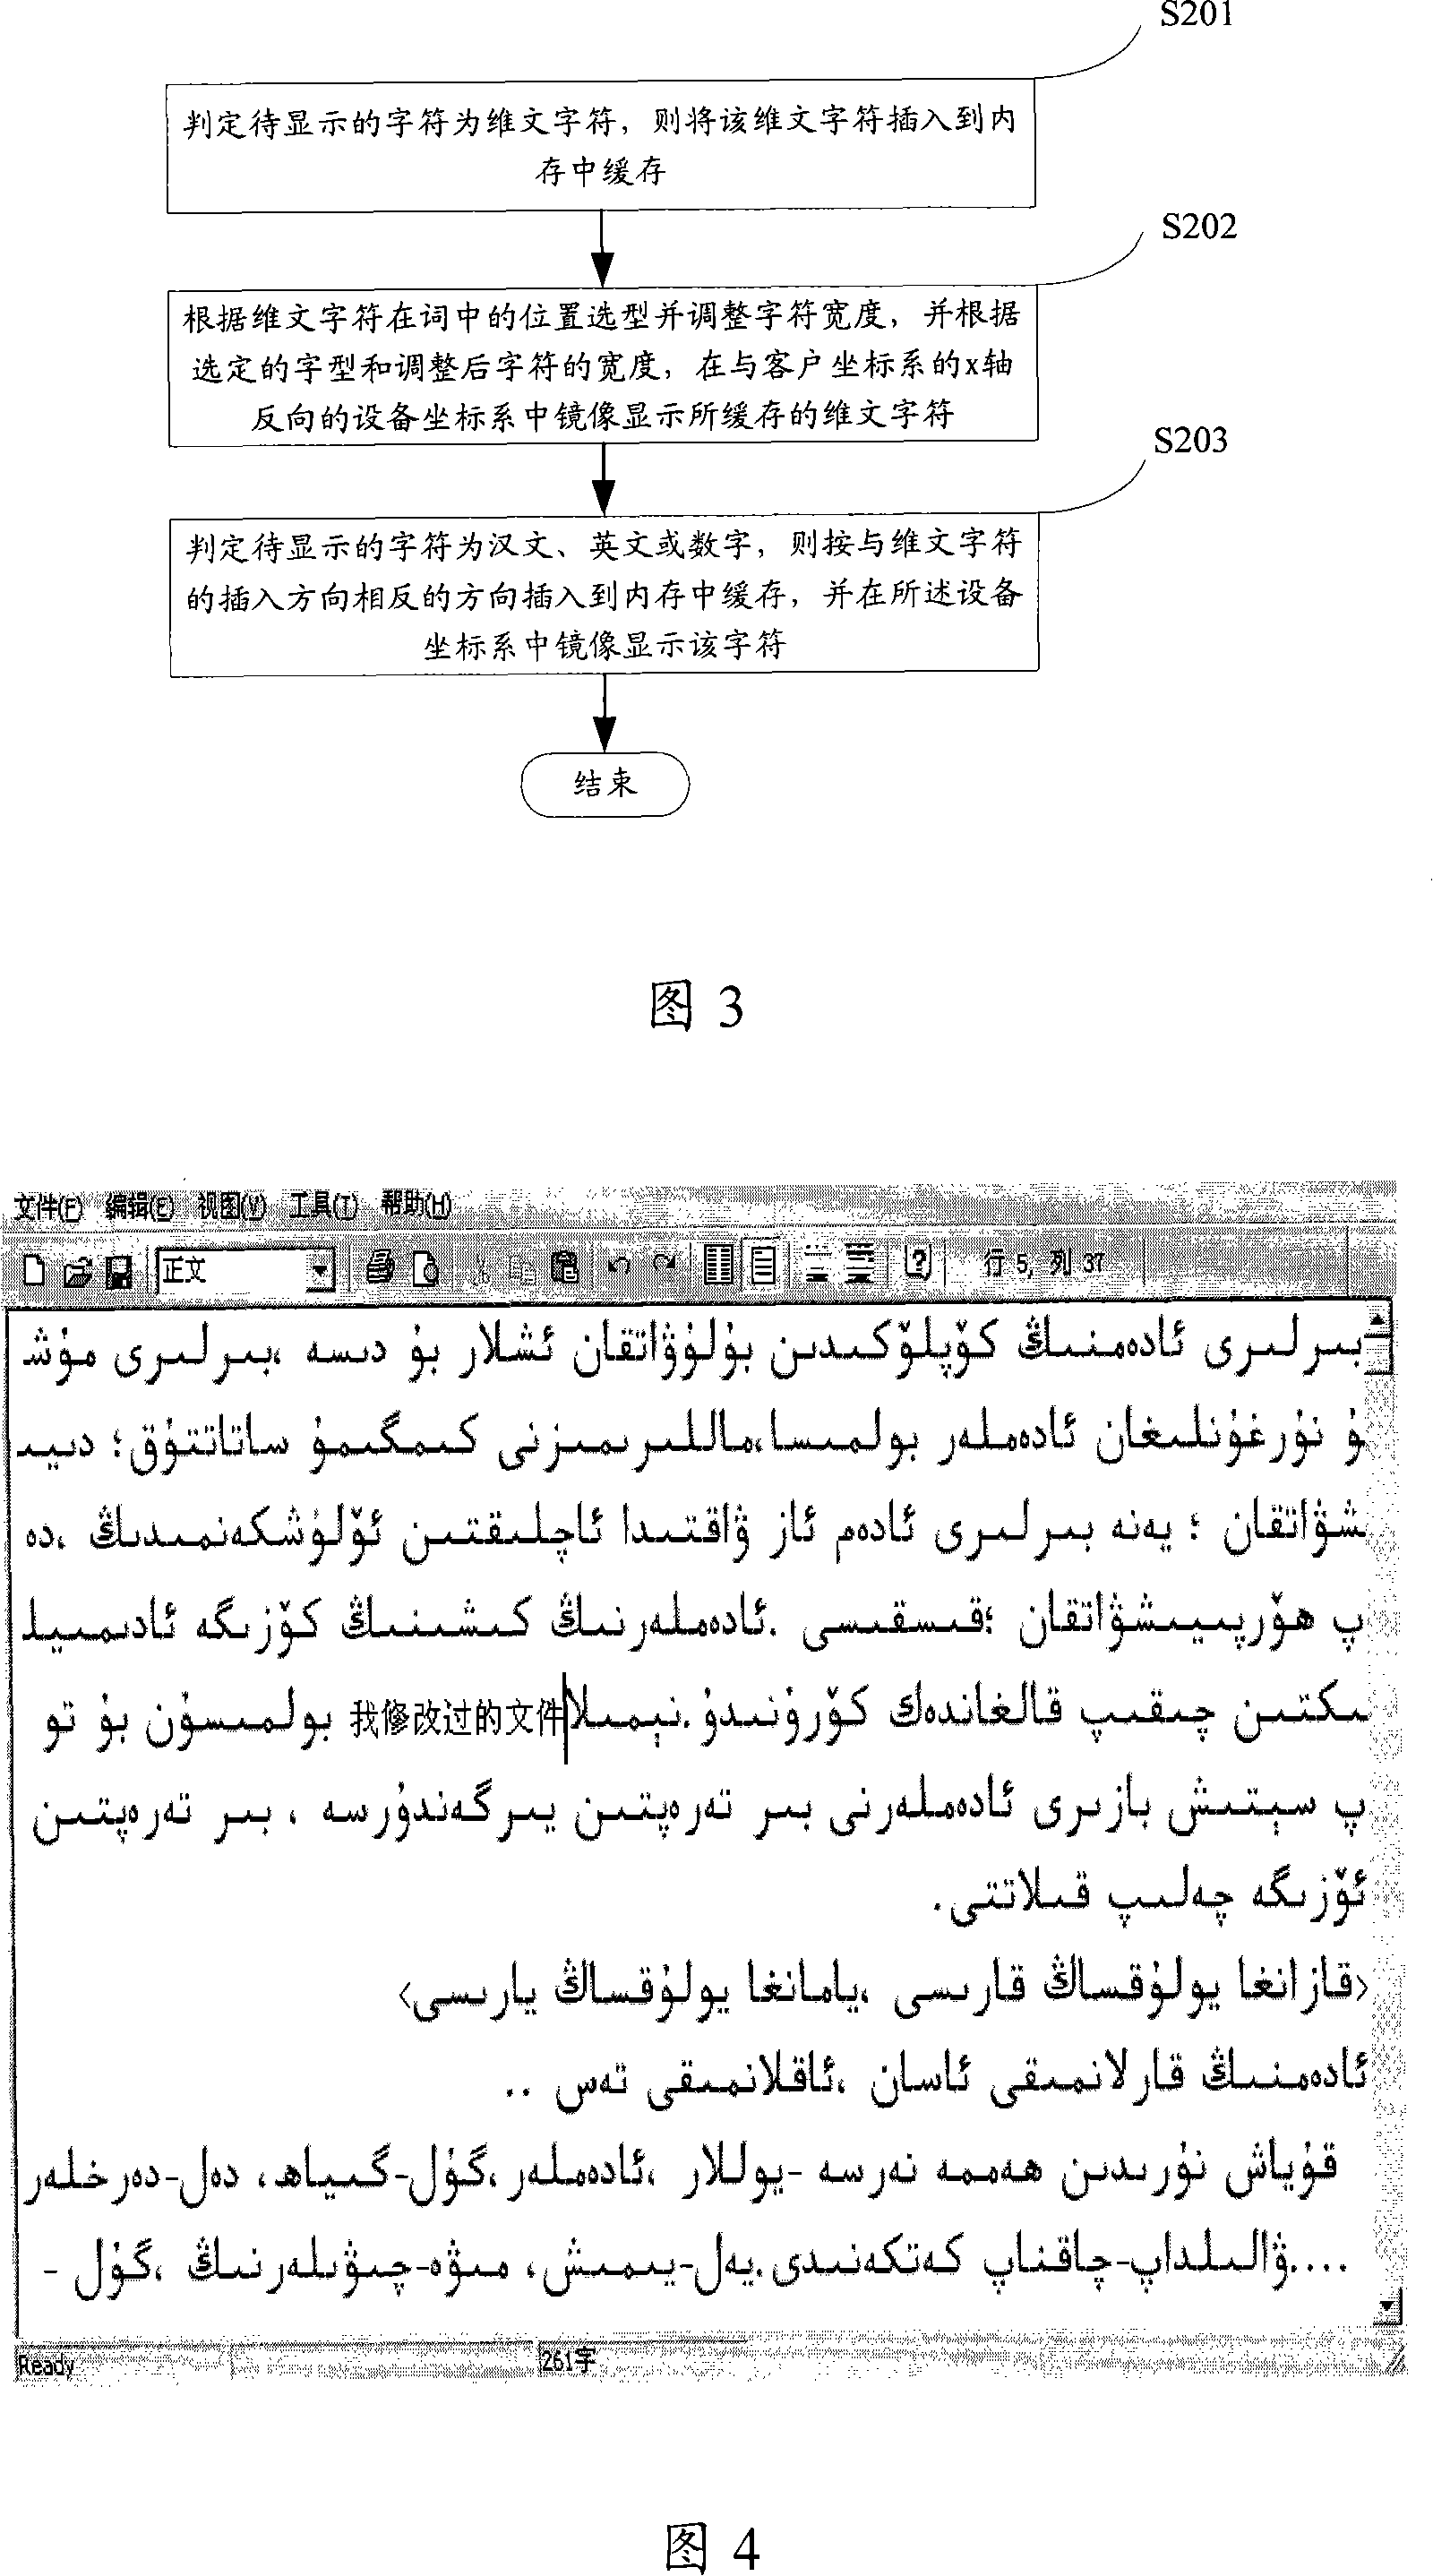 Method and device for displaying uighur